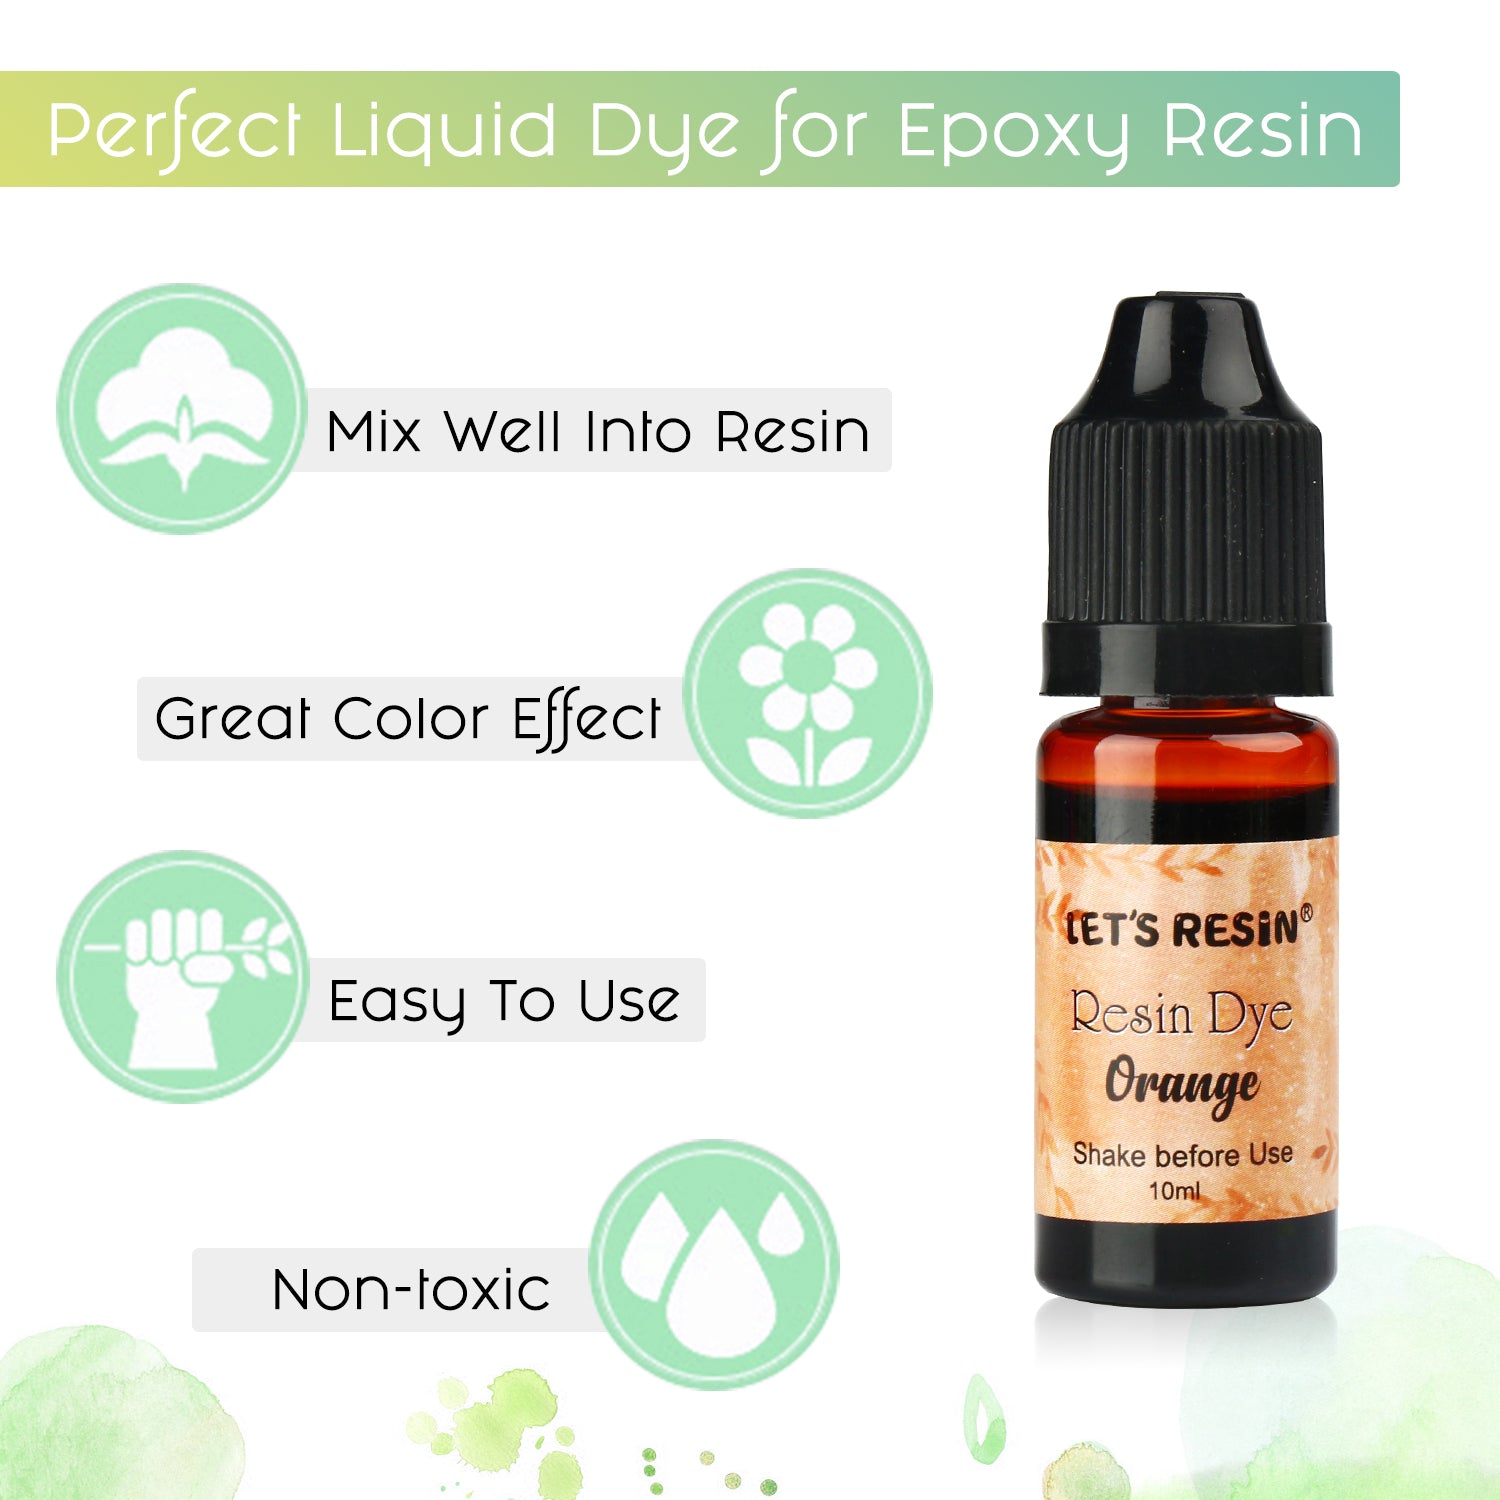 SigWong Epoxy Resin Pigment - 16 Color Liquid Translucent Epoxy Resin Colorant, Highly Concentrated Epoxy Resin Dye for DIY Jewelry Making, AB Resin